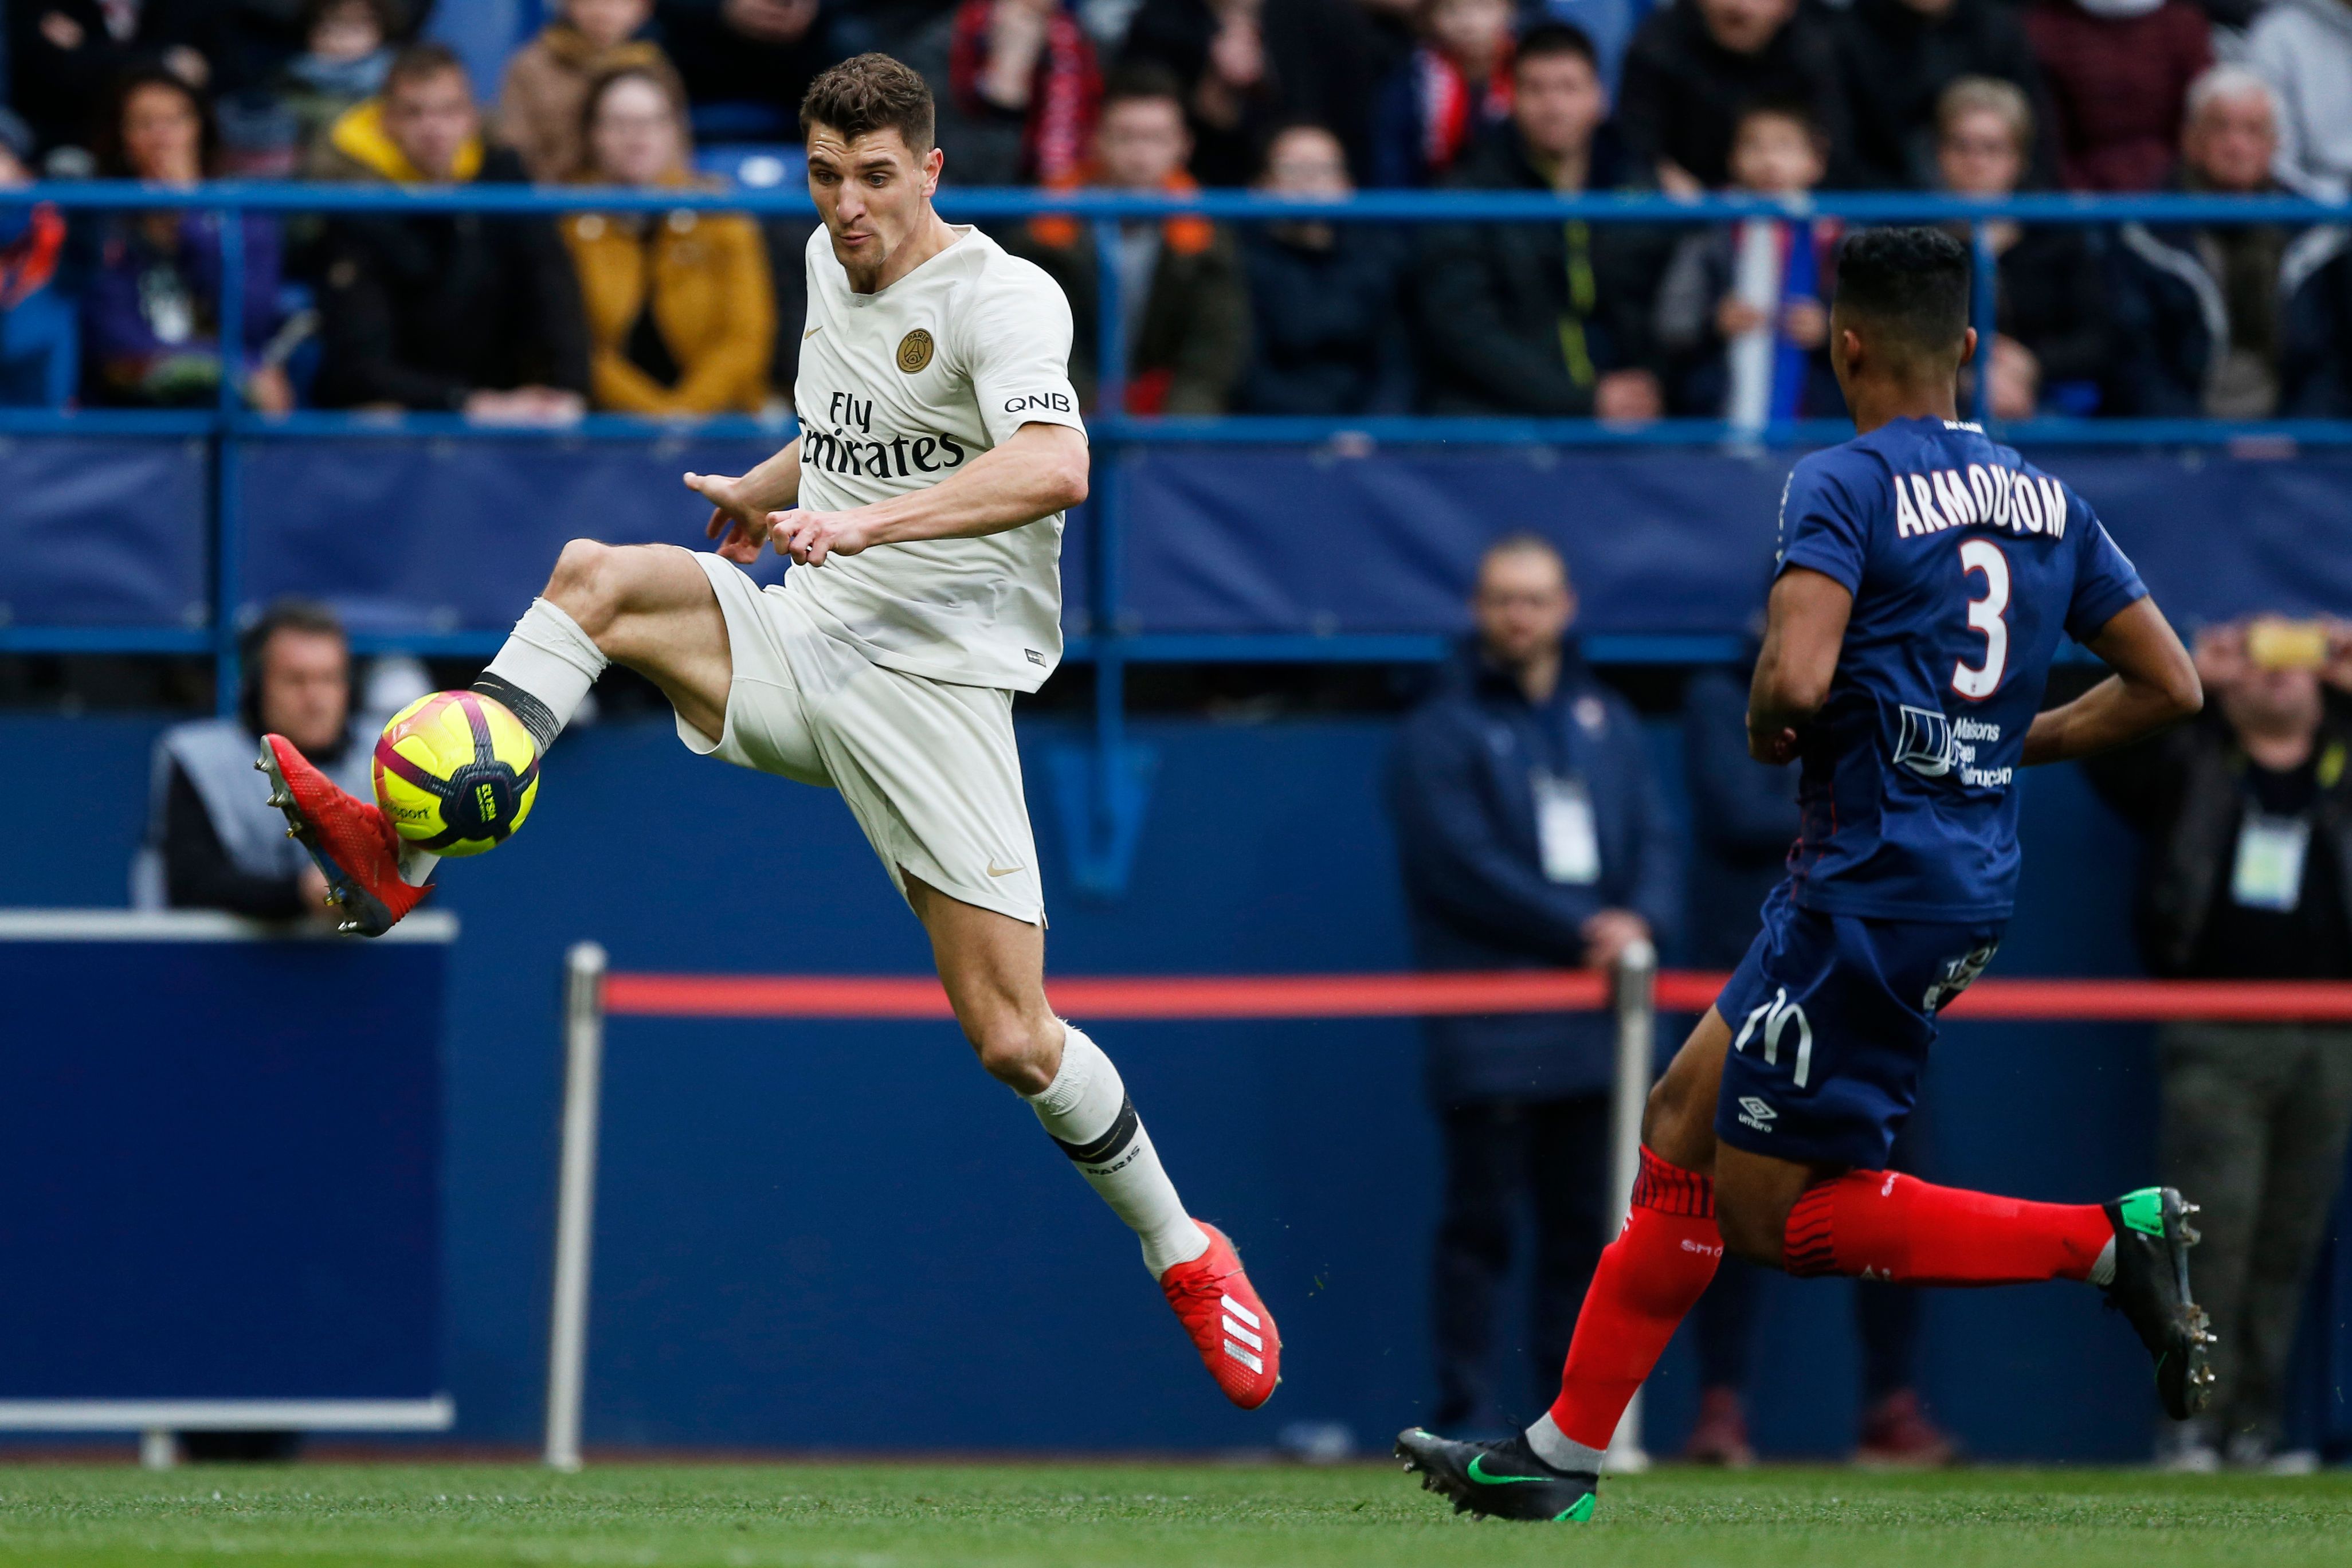 Meunier prefers Manchester United over Arsenal (Photo by CHARLY TRIBALLEAU/AFP/Getty Images)